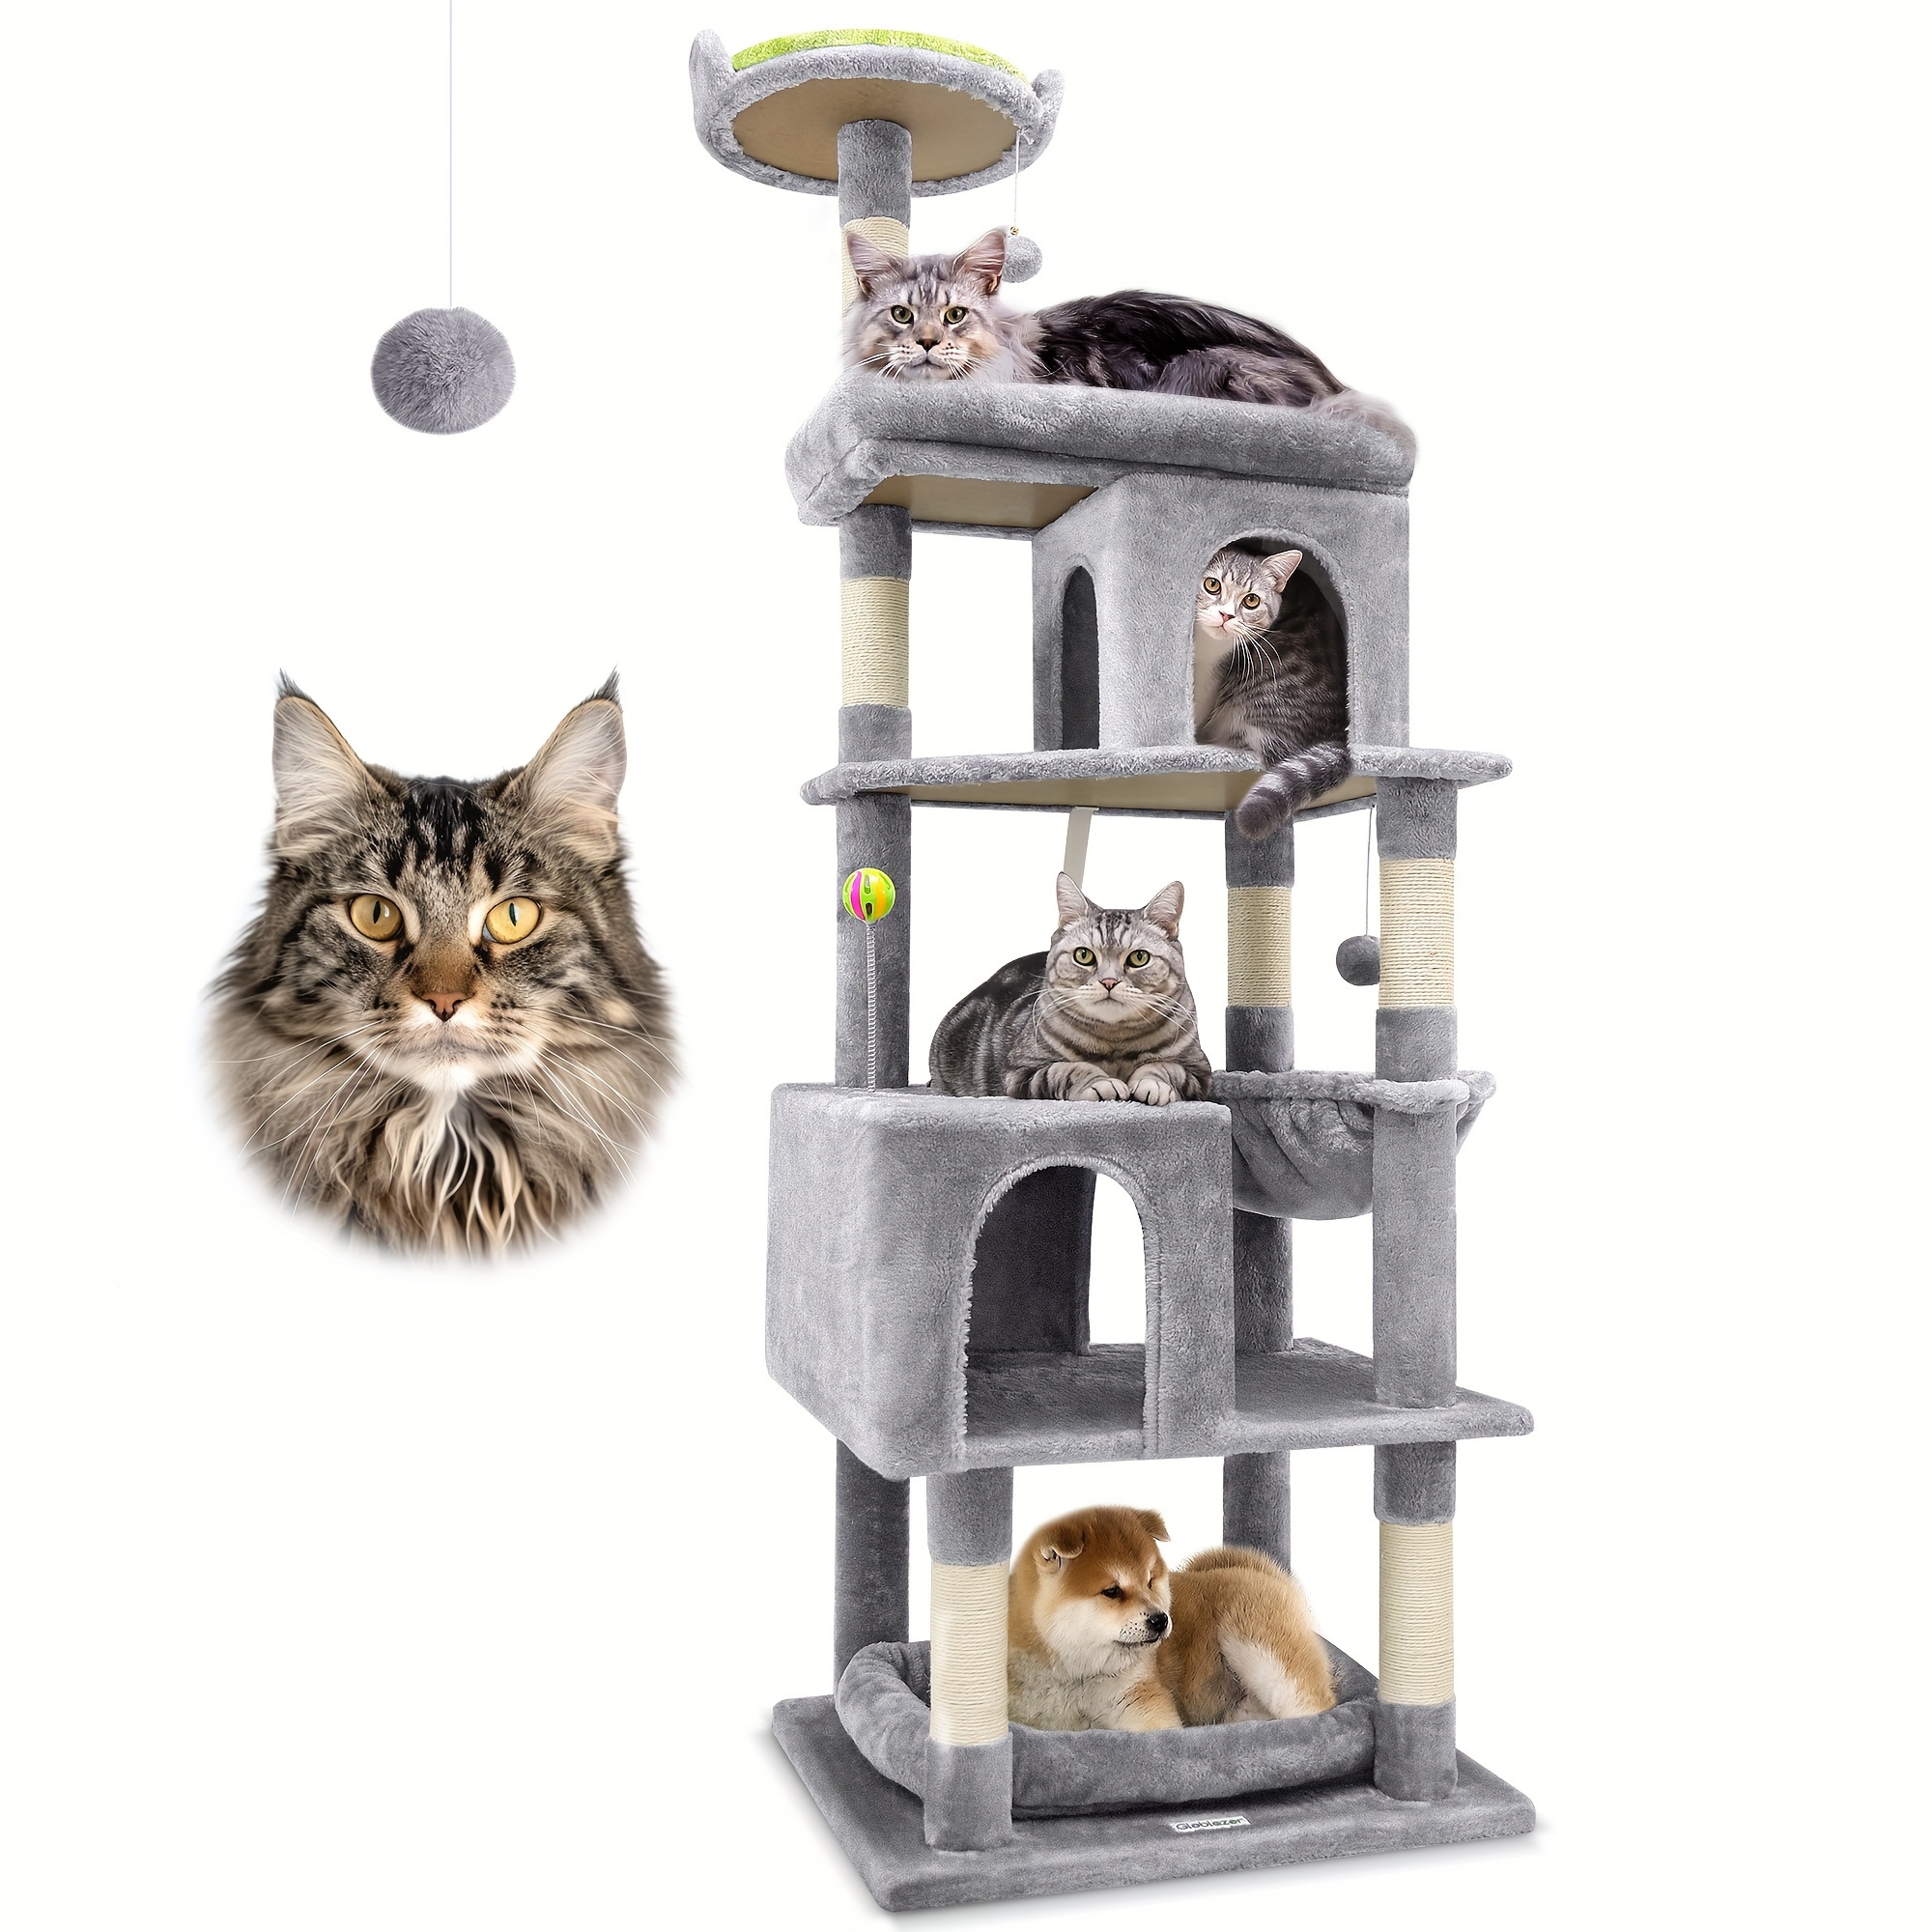 

S72 Tall Large Cat Tree, Sturdy Series 72in Cat Tower Condos For Indoor Adult Biggest Cats (maine Coon) 20lbs+, 6 Scratching Posts, 2 Cozy Caves, Hammock Basket #globlazer